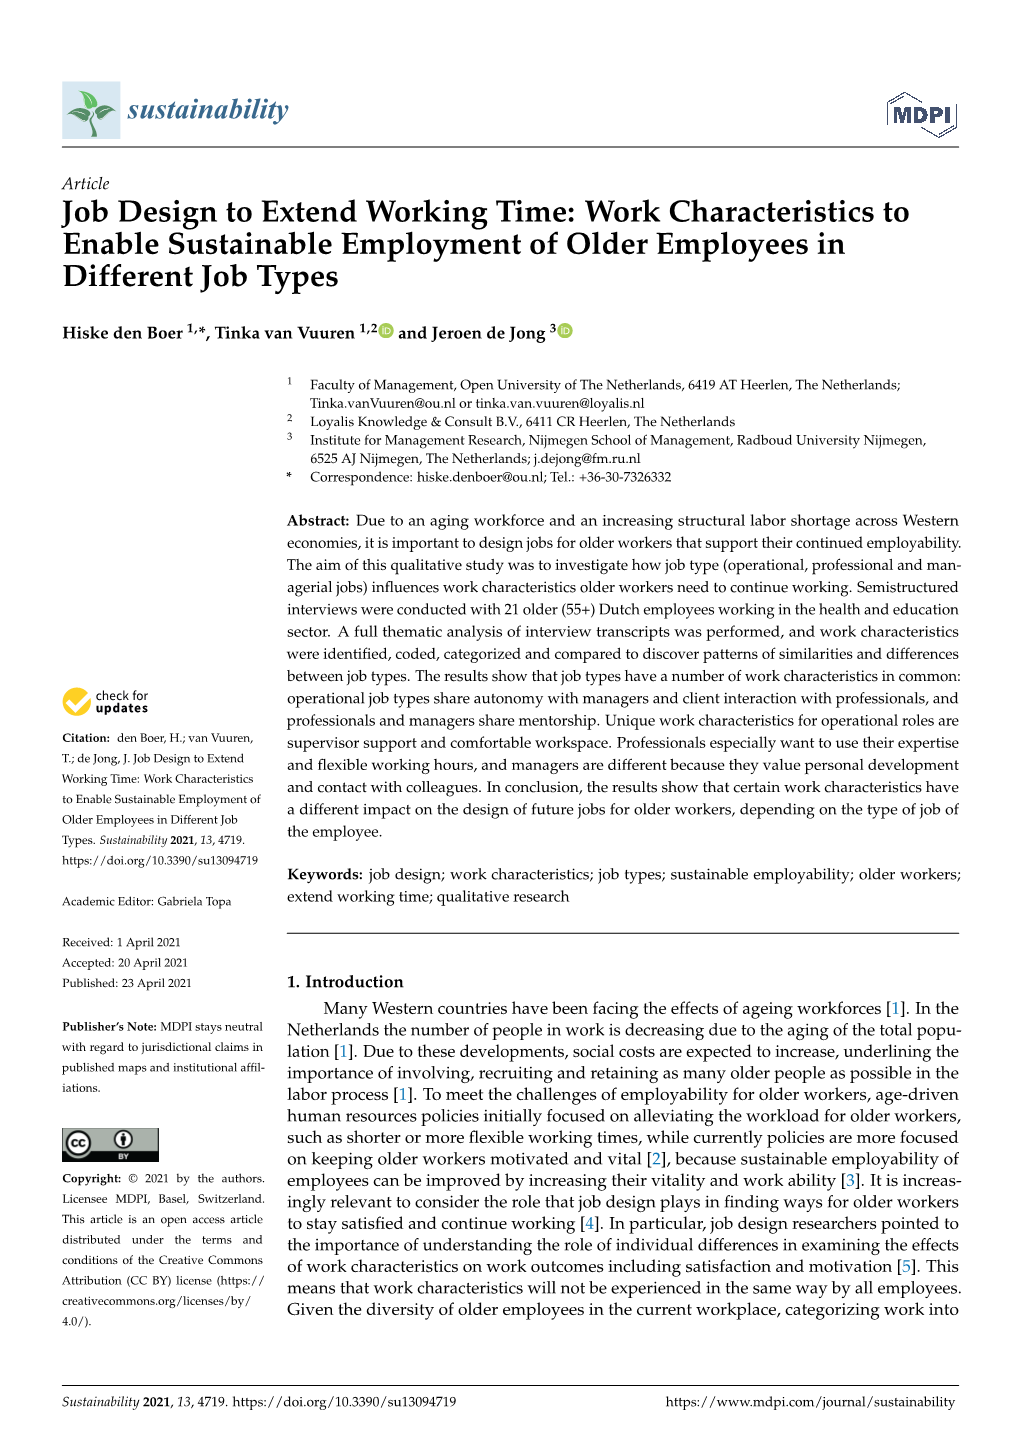 Work Characteristics to Enable Sustainable Employment of Older Employees in Different Job Types